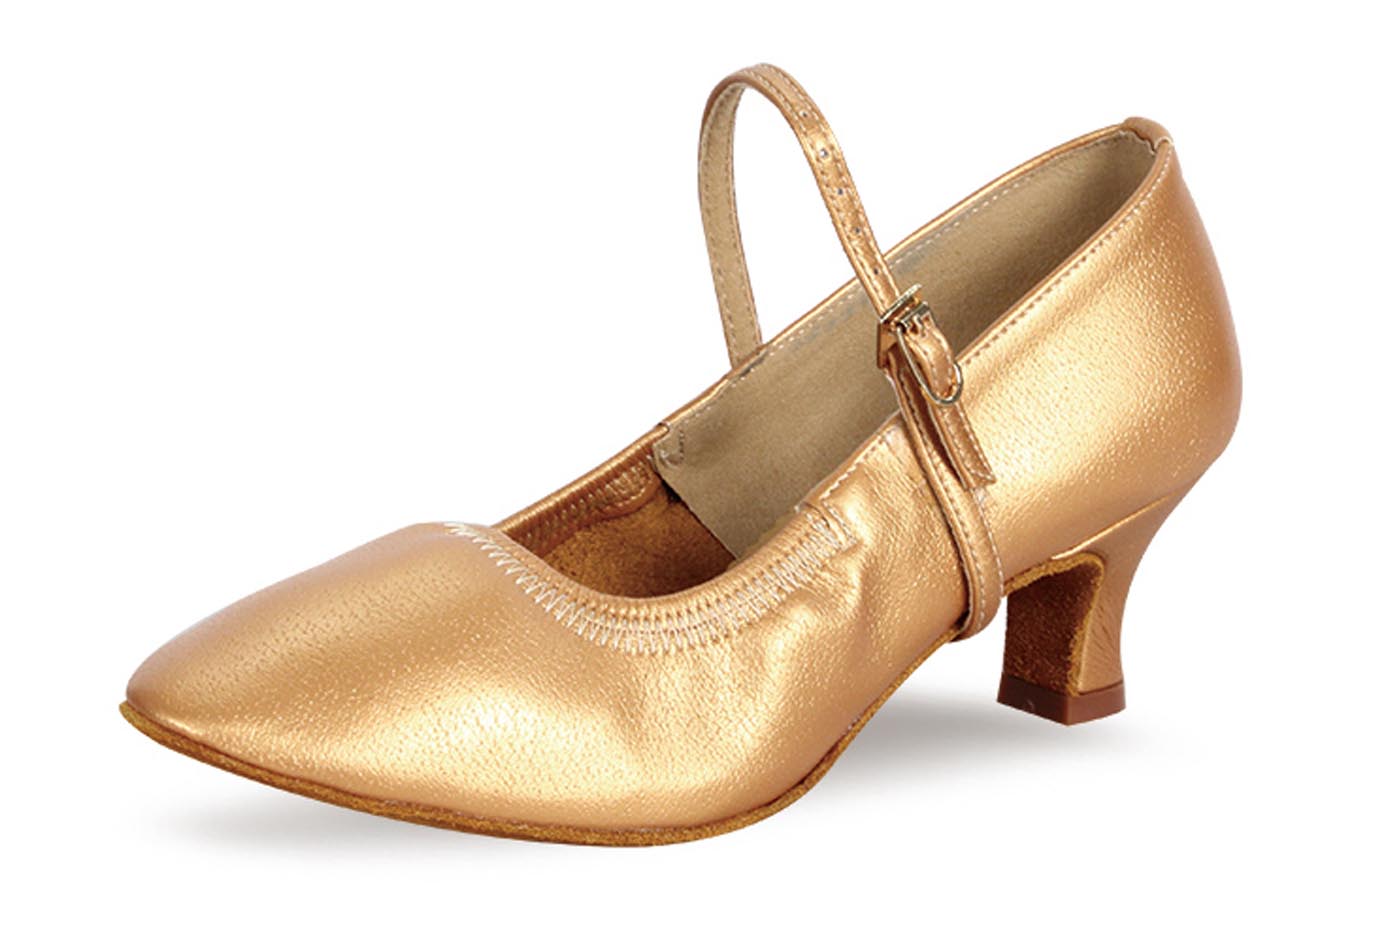 BD Dance 125 Ladies Ballroom Dance Shoe in Tan or Black Leather with Elasticized Throat